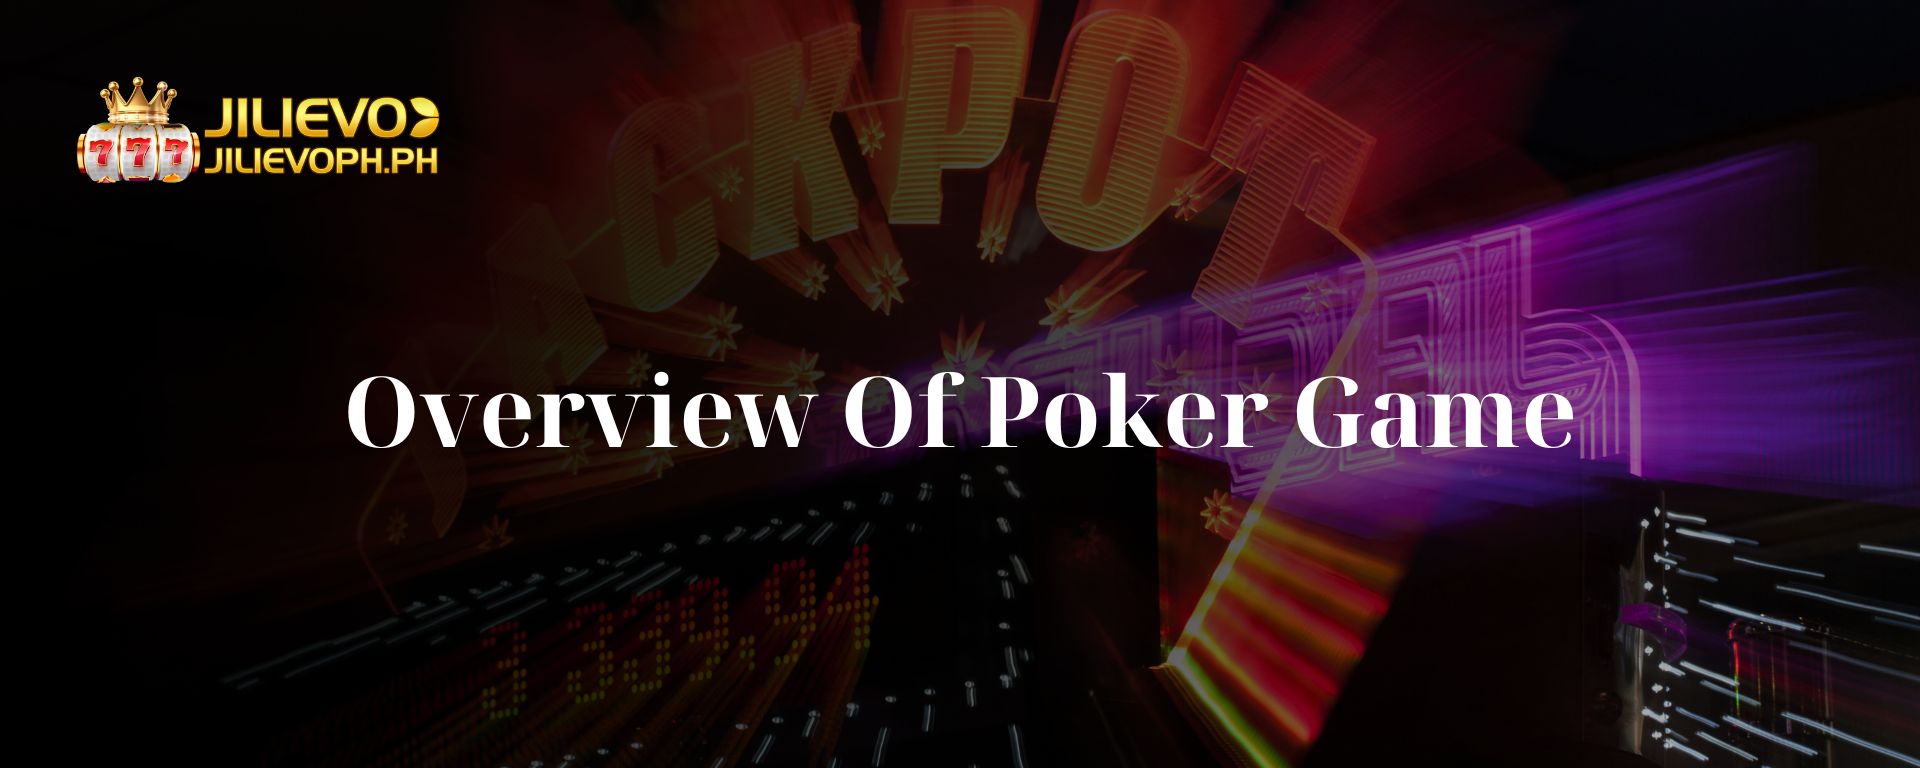 Overview Of Poker Game